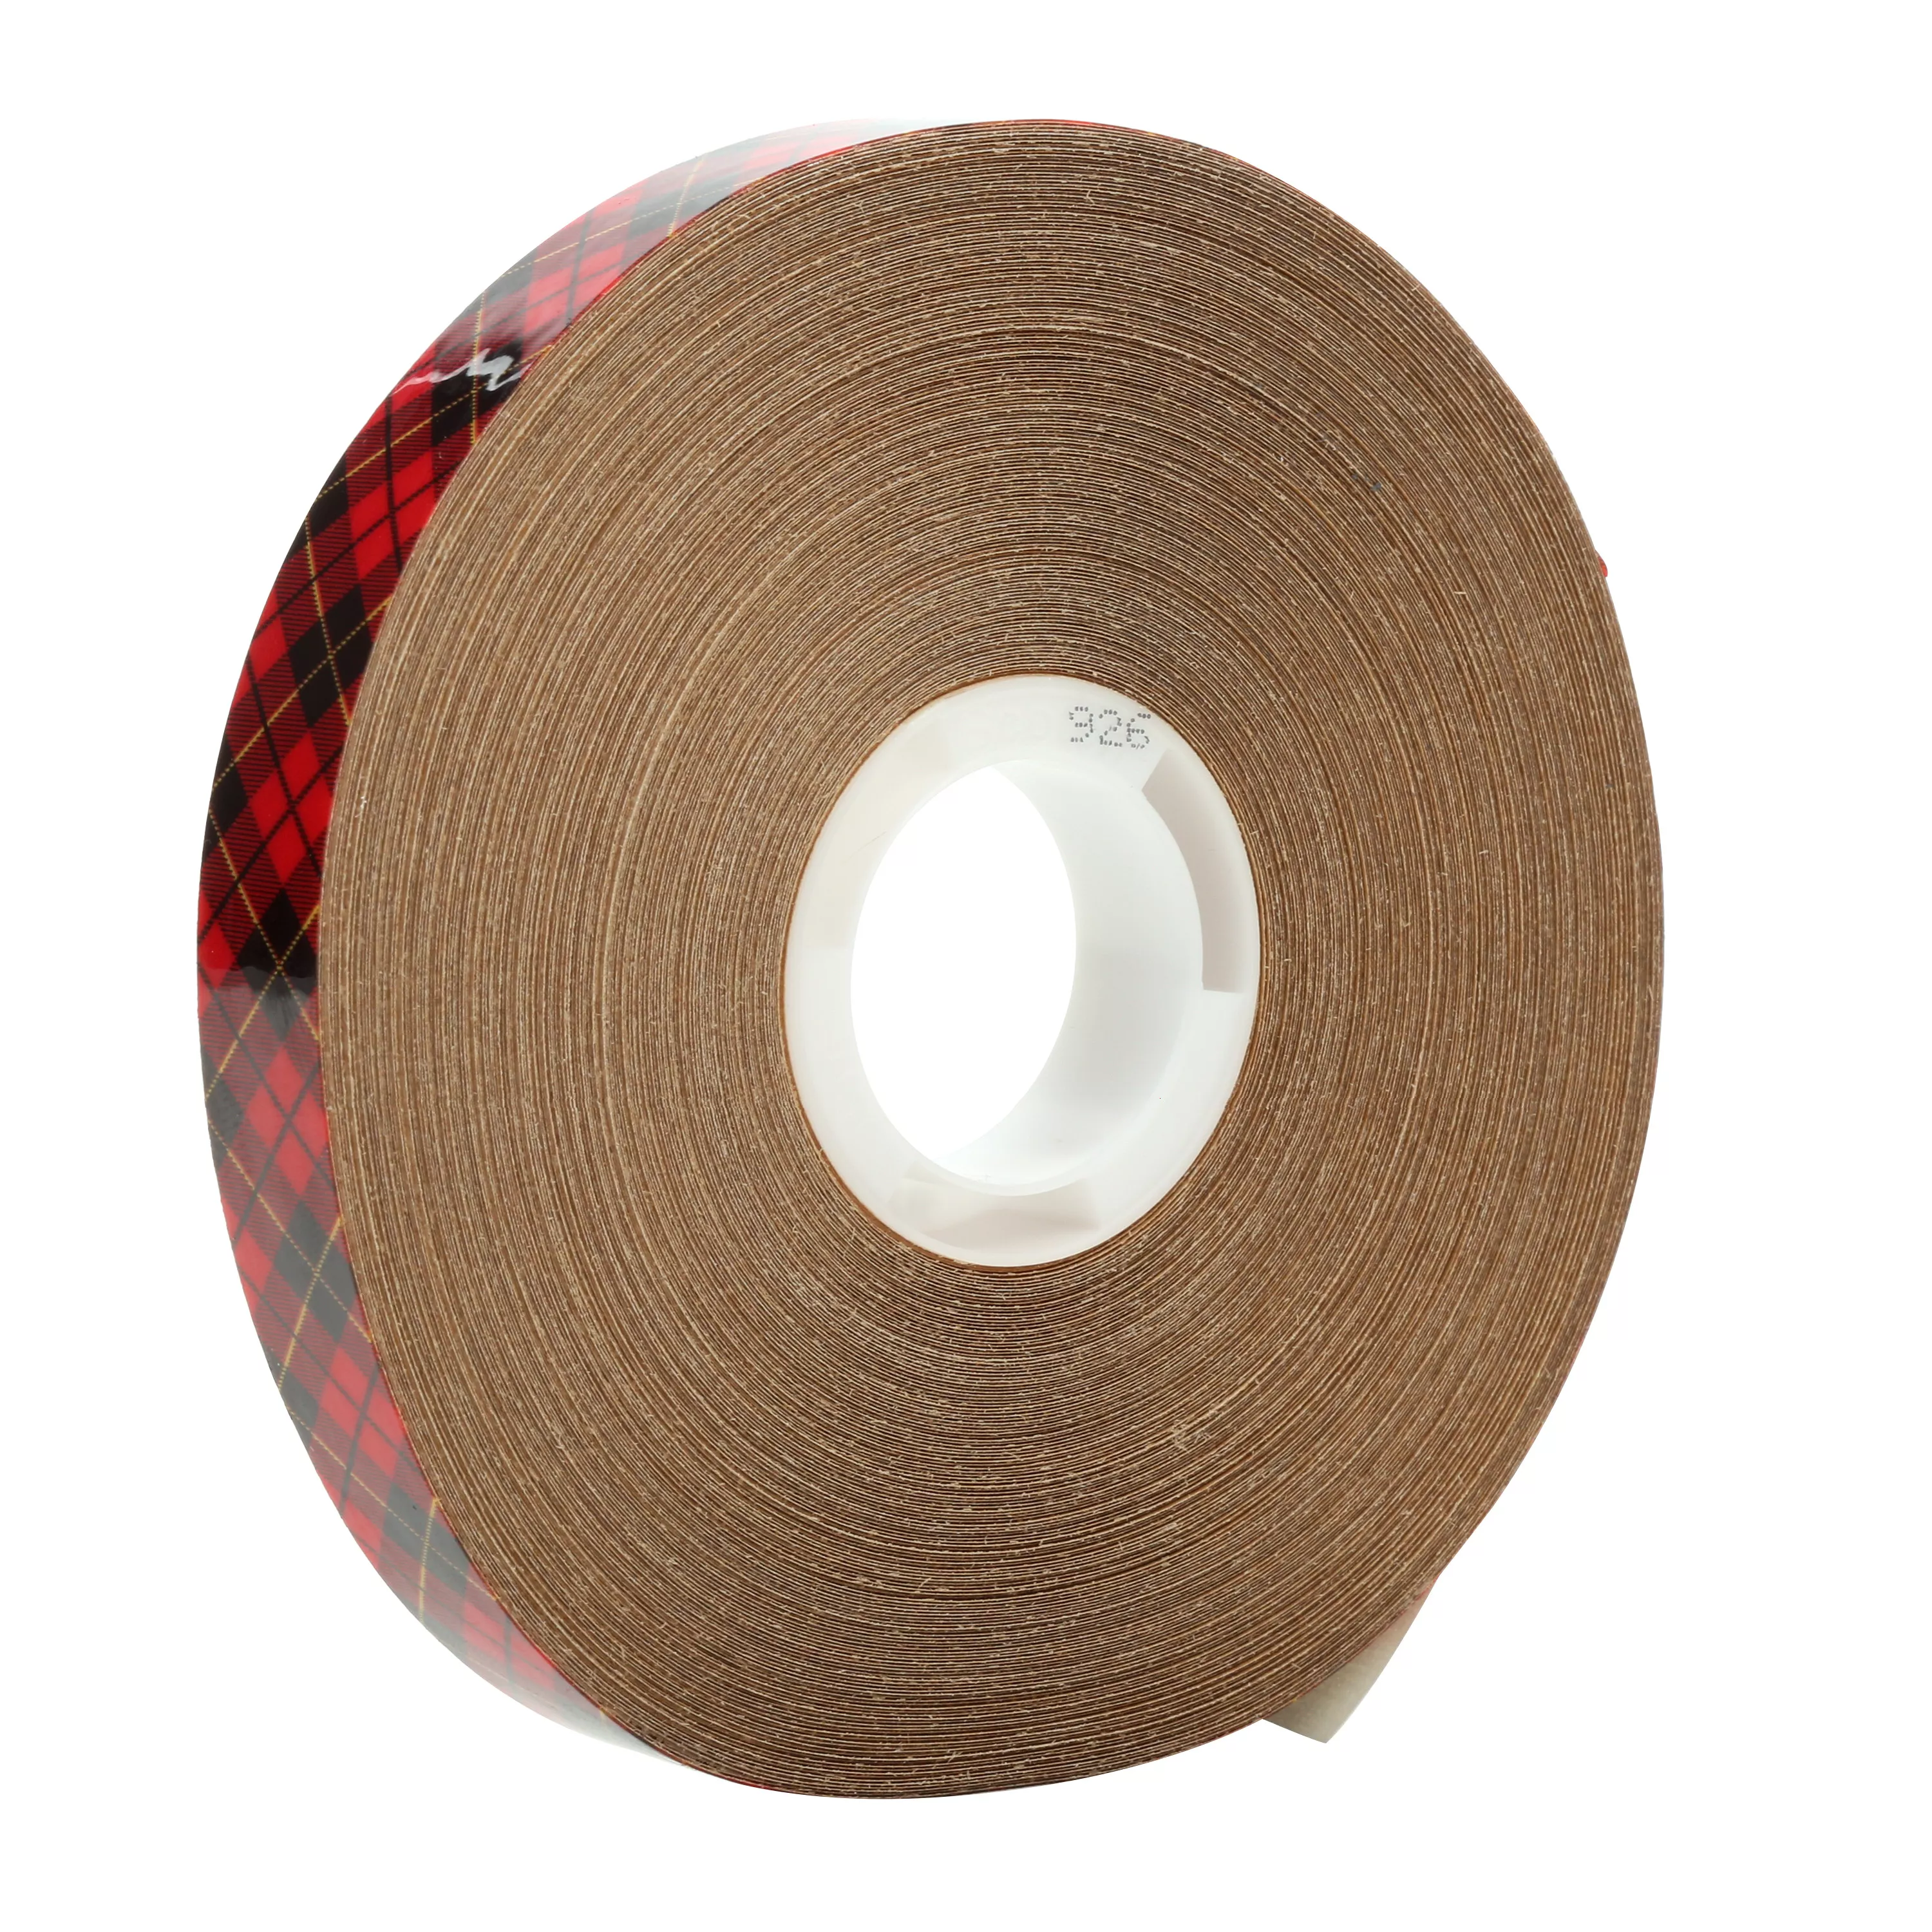 Scotch® ATG Adhesive Transfer Tape 926, Clear, 1/4 in x 36 yd, 5 mil,
144 Roll/Case